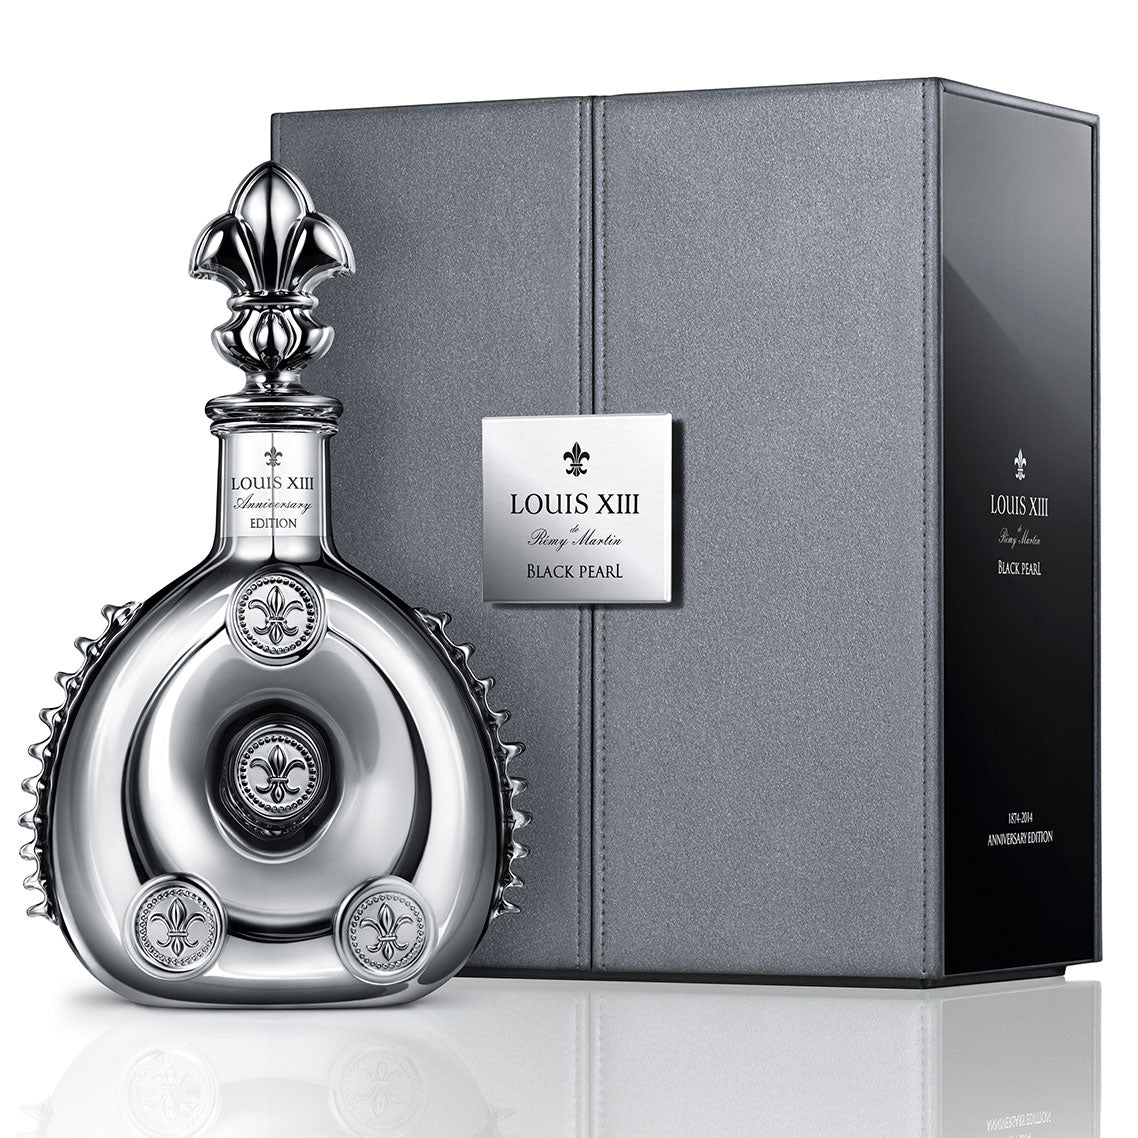 The limited edition Louis XIII Black Pearl AHD Cognac arrives in Singapore